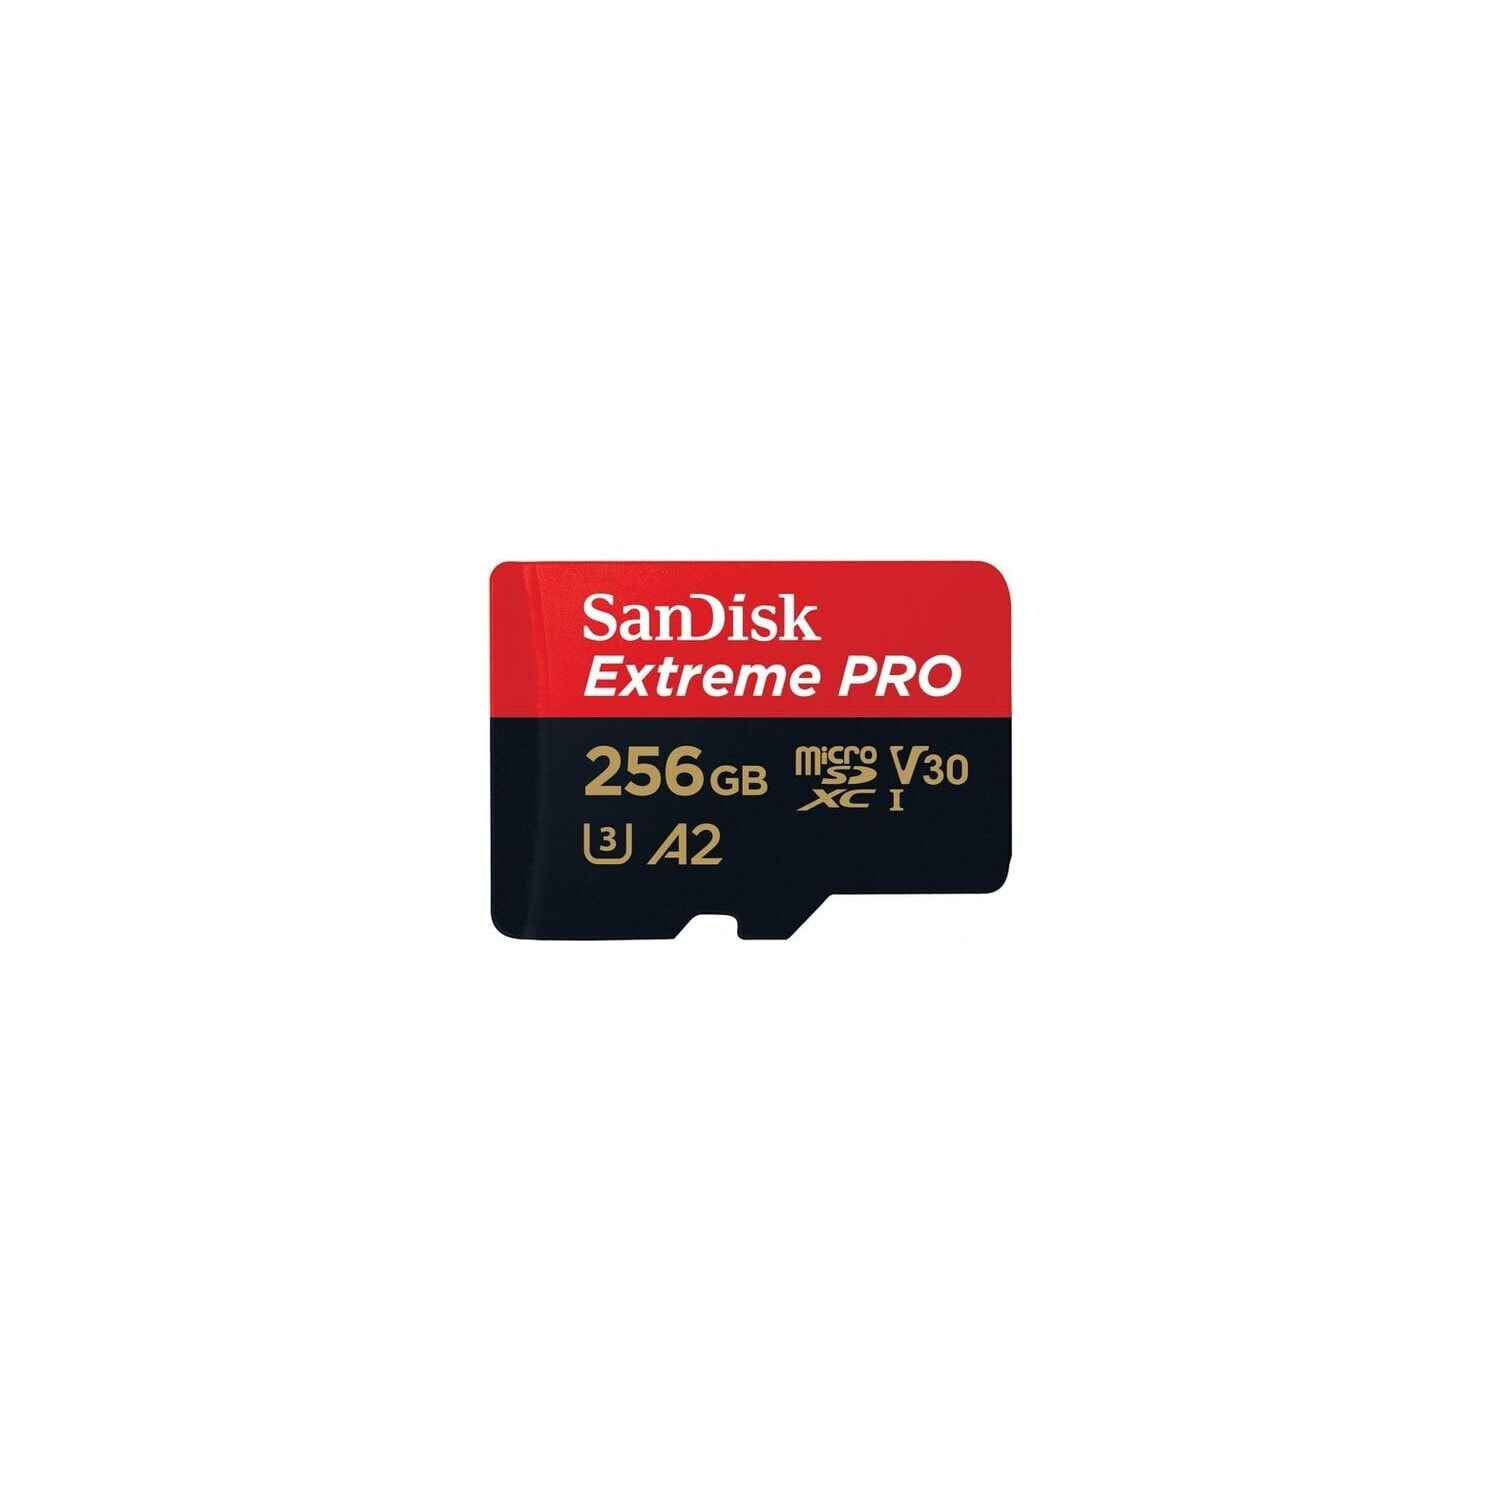 Sandisk Extreme Pro Microsdxc 256GB + Sd Adapter + Rescuepro Deluxe 170MB/S A2 C10 V30 Uhs-I U3